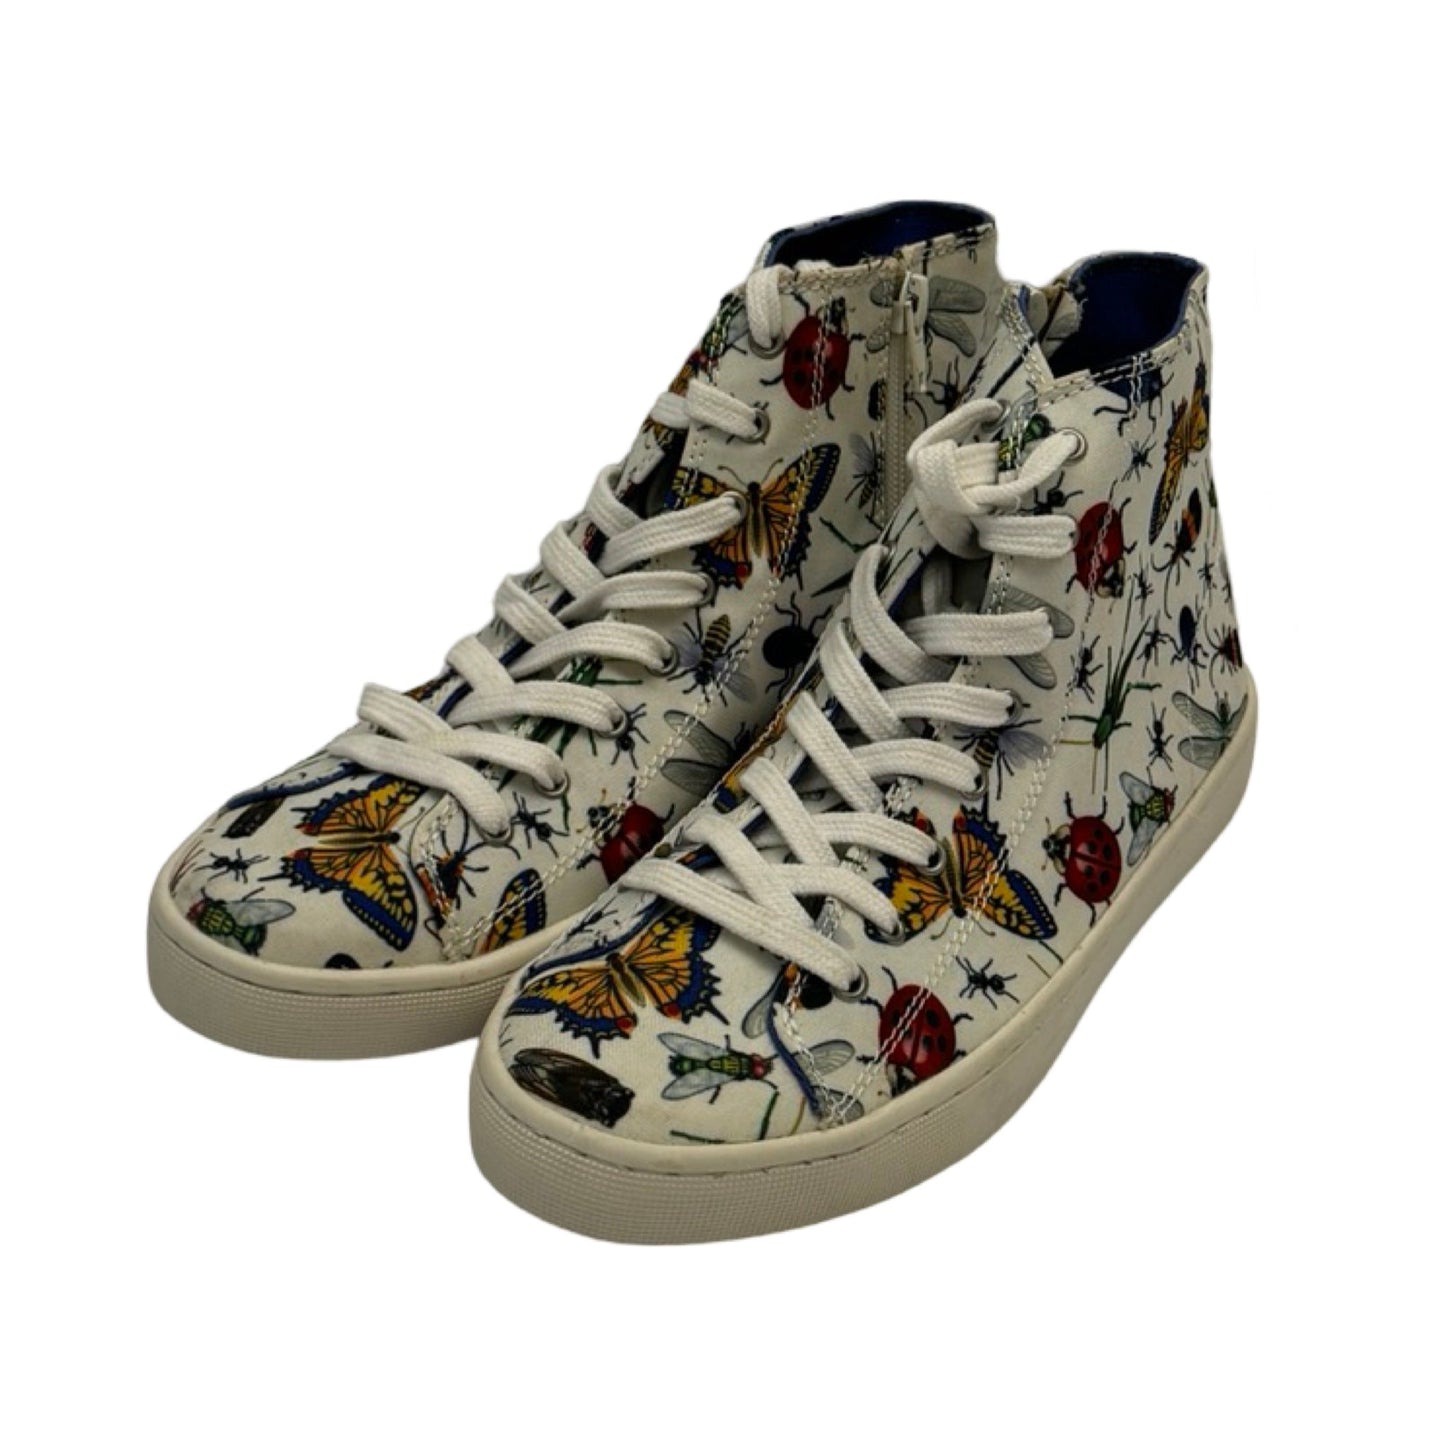 White Shoes Sneakers Loudmouth, Size 6